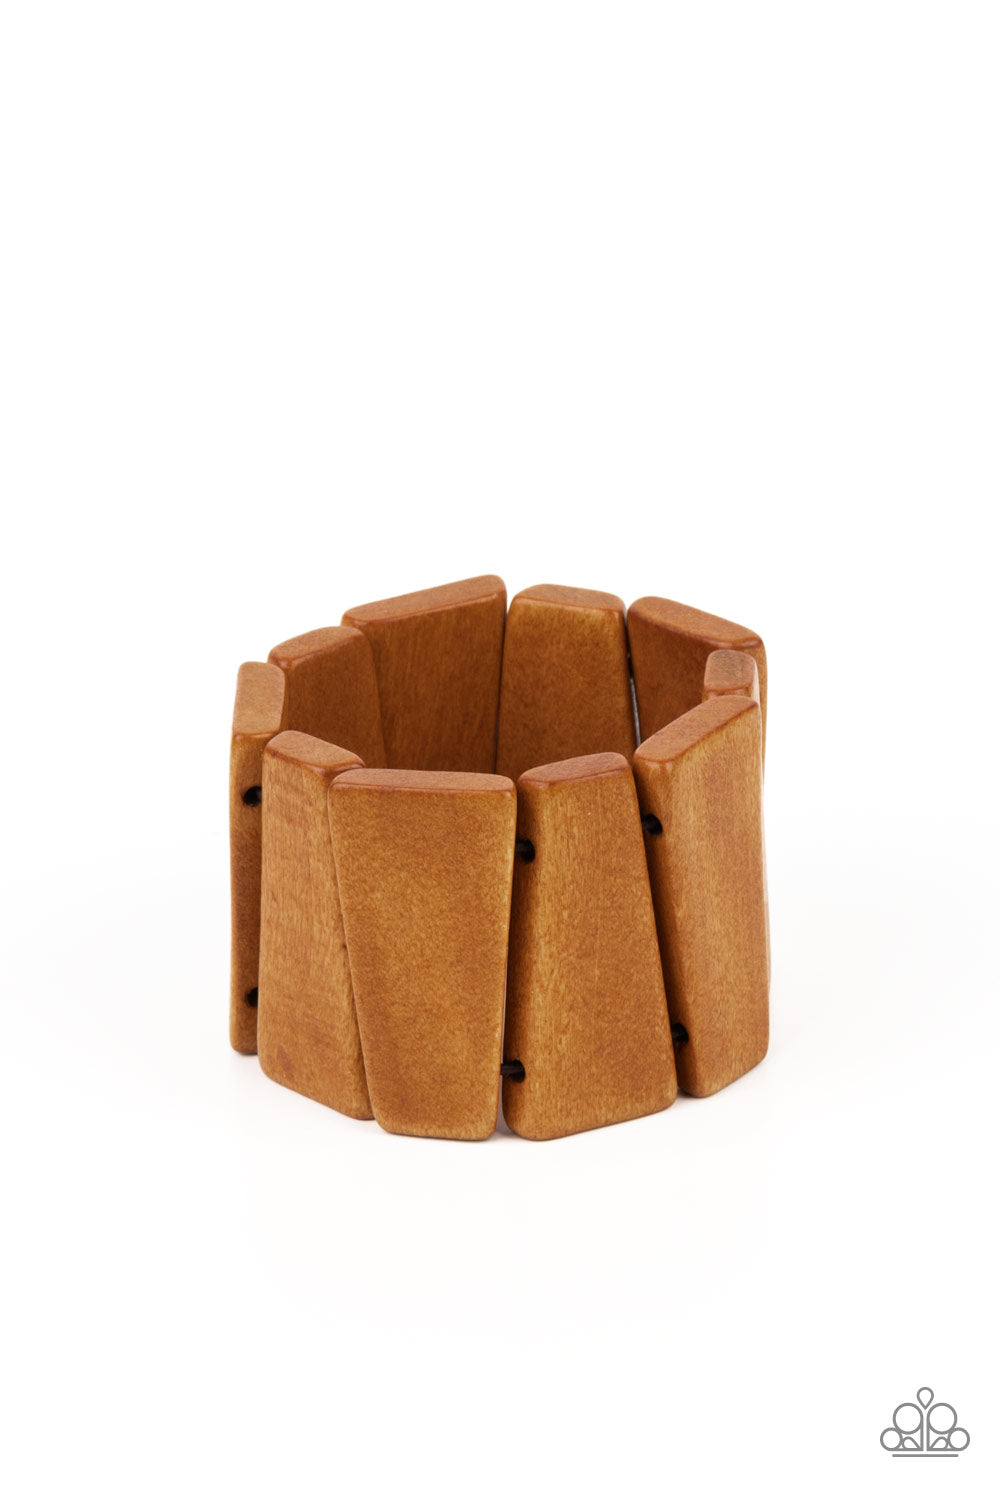 Barbados Backdrop Brown Stretch Bracelet - Paparazzi Accessories  Polished in a natural brown finish, chunky triangular wooden frames are threaded along stretchy bands around the wrist for an earthy look.  Sold as one individual bracelet.